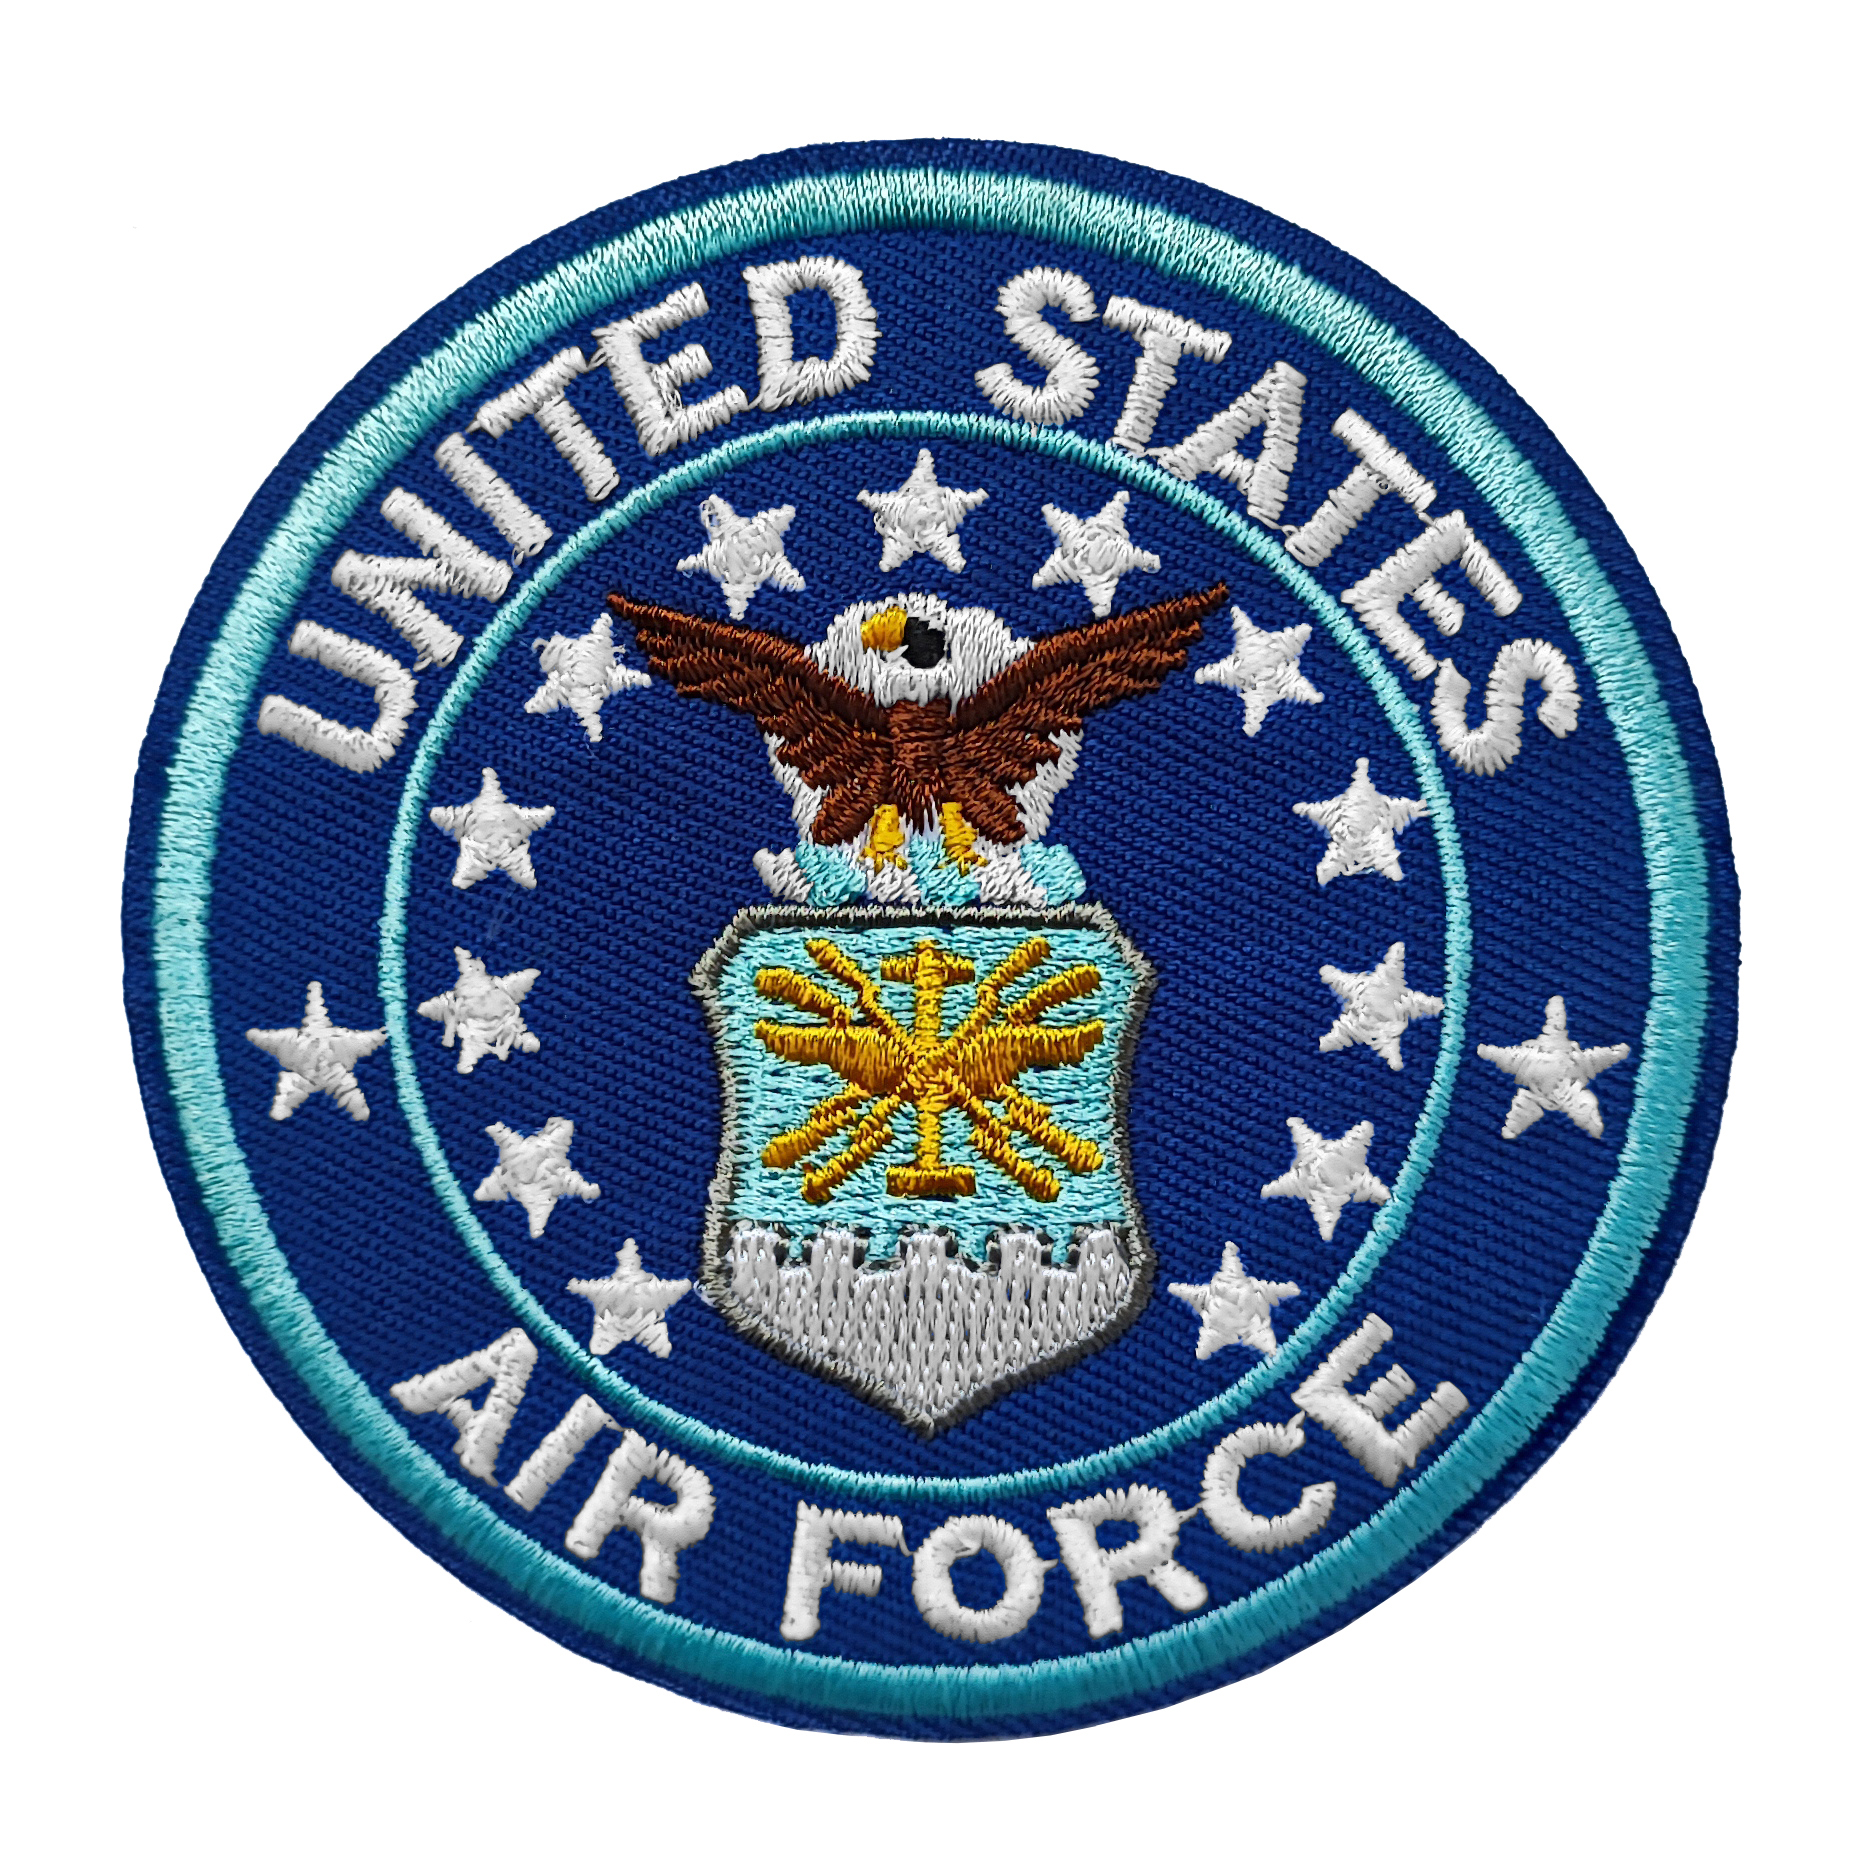 PAT533 - Patch United States Air Force armée army militaire 1